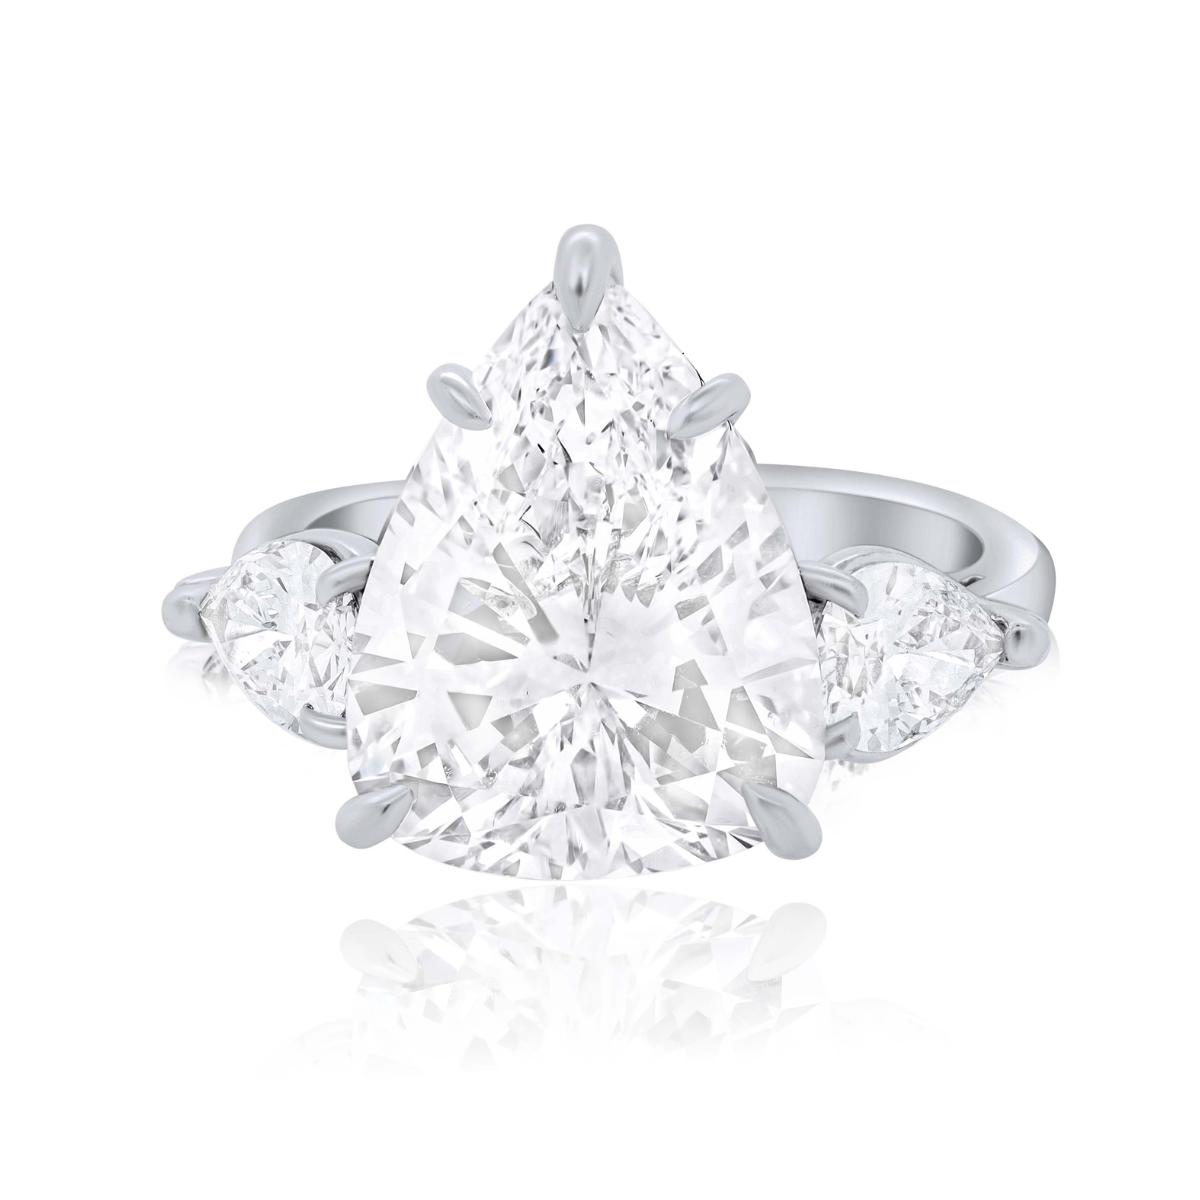 5.82ct Pear Shaped Daimond Ring